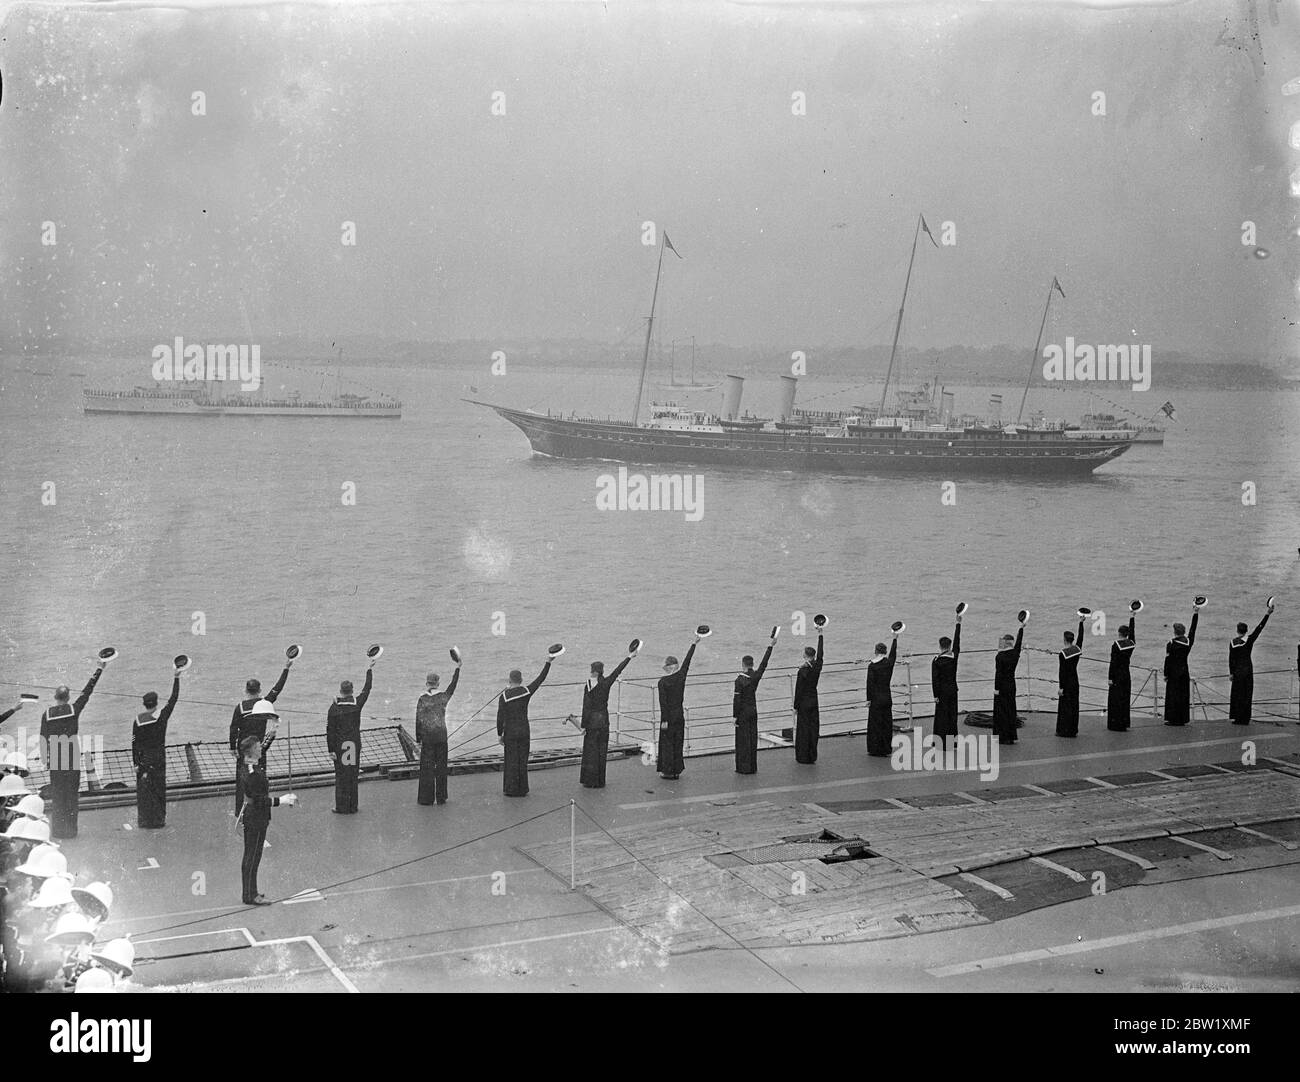 The King reviews fleet at Spithead. Aboard the Royal yacht, 'Victoria and Albert', the King passed through the 5 mile line of 160 warships and merchant vessels when he made his Coronation review of the British Navy and Mercantile Marine at Spithead. Nearly 300 ships, including 17 from the foreign fleets, were reviewed. Photo shows, men of the aircraft carrier HMS Glorious cheering as the Royal yacht 'Victoria and Albert' passed down the lines with the King aboard. 20 May 1937 Stock Photo